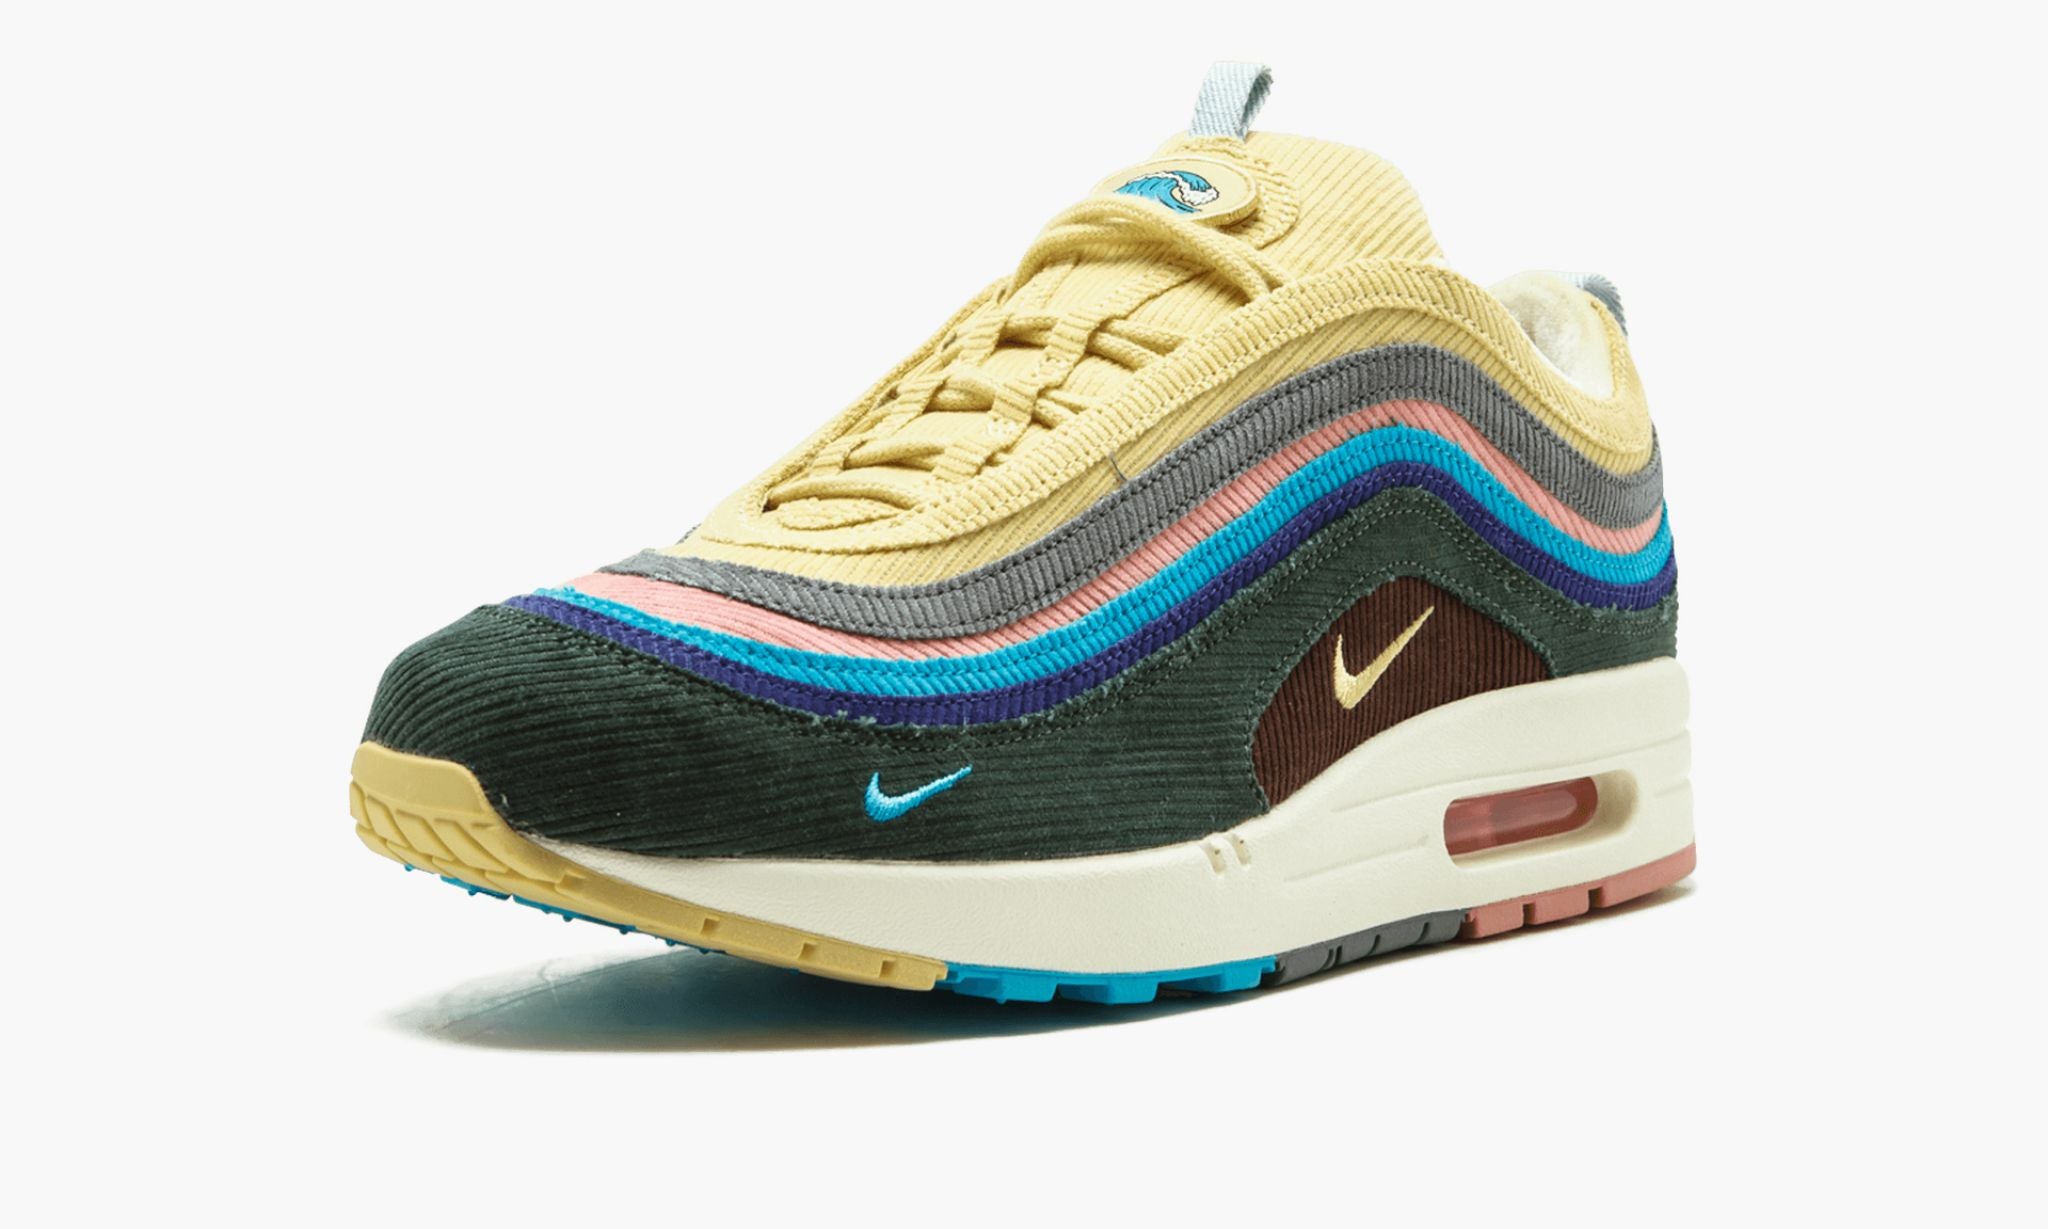 AIR MAX 1/97 VF SW "Sean Wotherspoon"